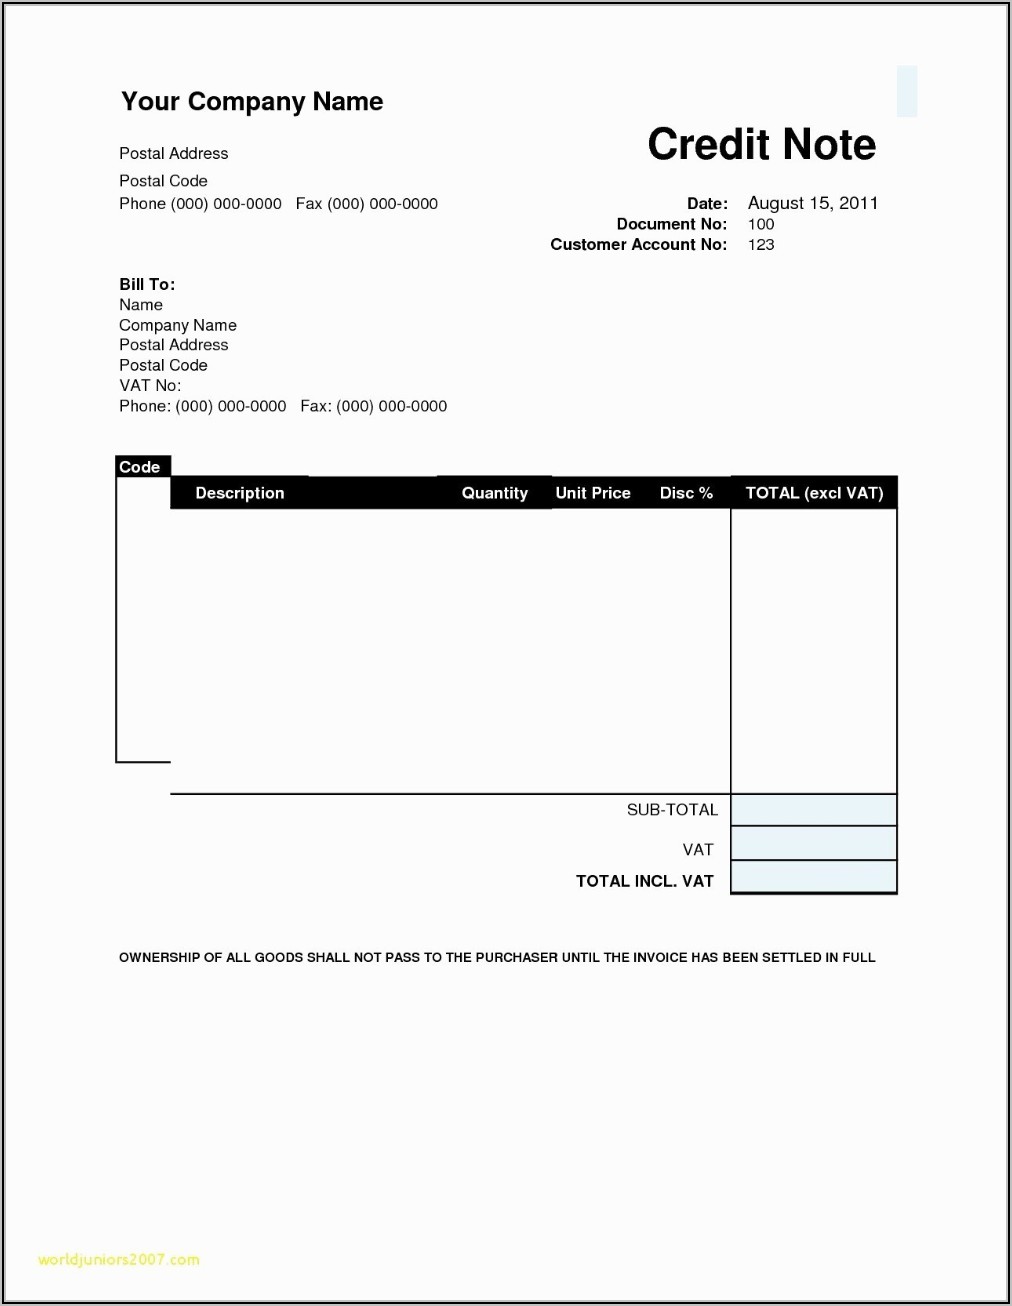 Film Production Invoice Template